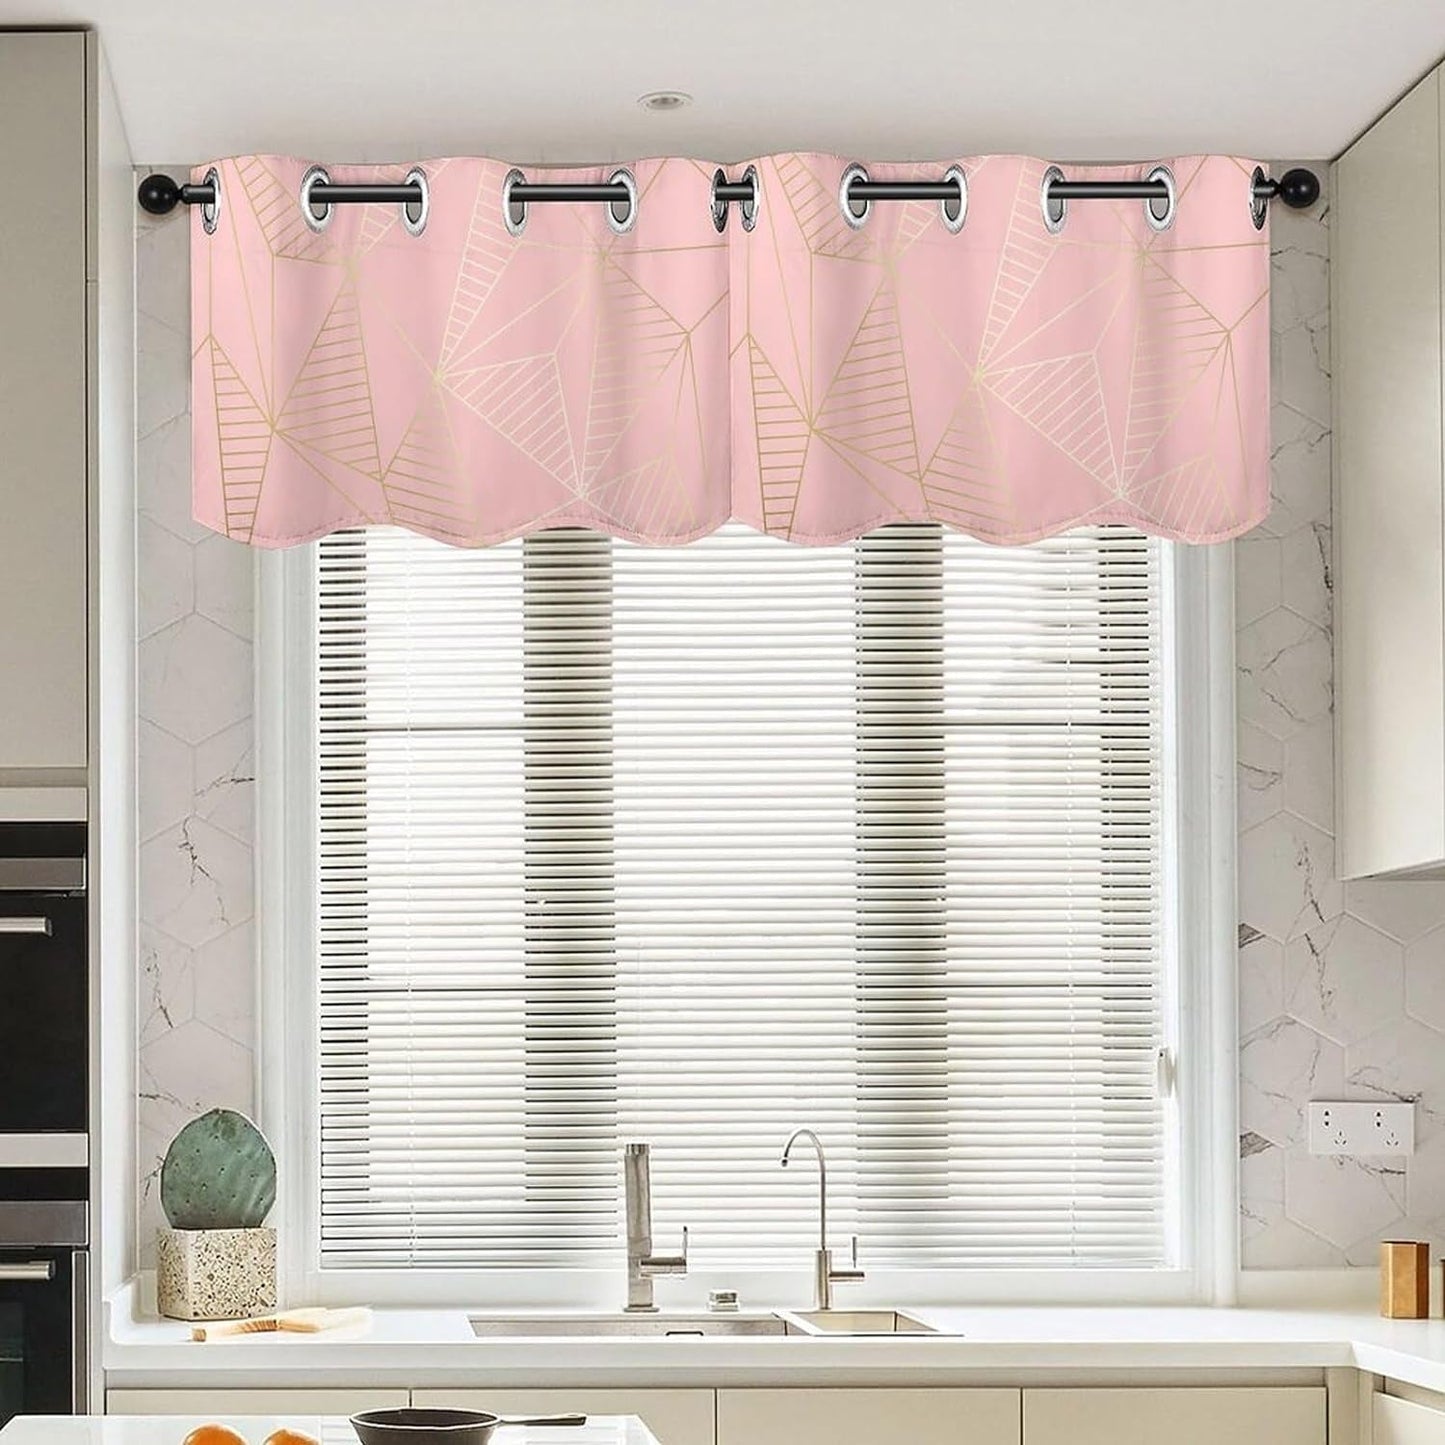 Pink Unicorn Valances for Bedroom Windows 2 Pack Fairy Tale Magic Garden Small Window Valance for Kitchen Bathroom Windows Decor with Grommet 52X18 Inch